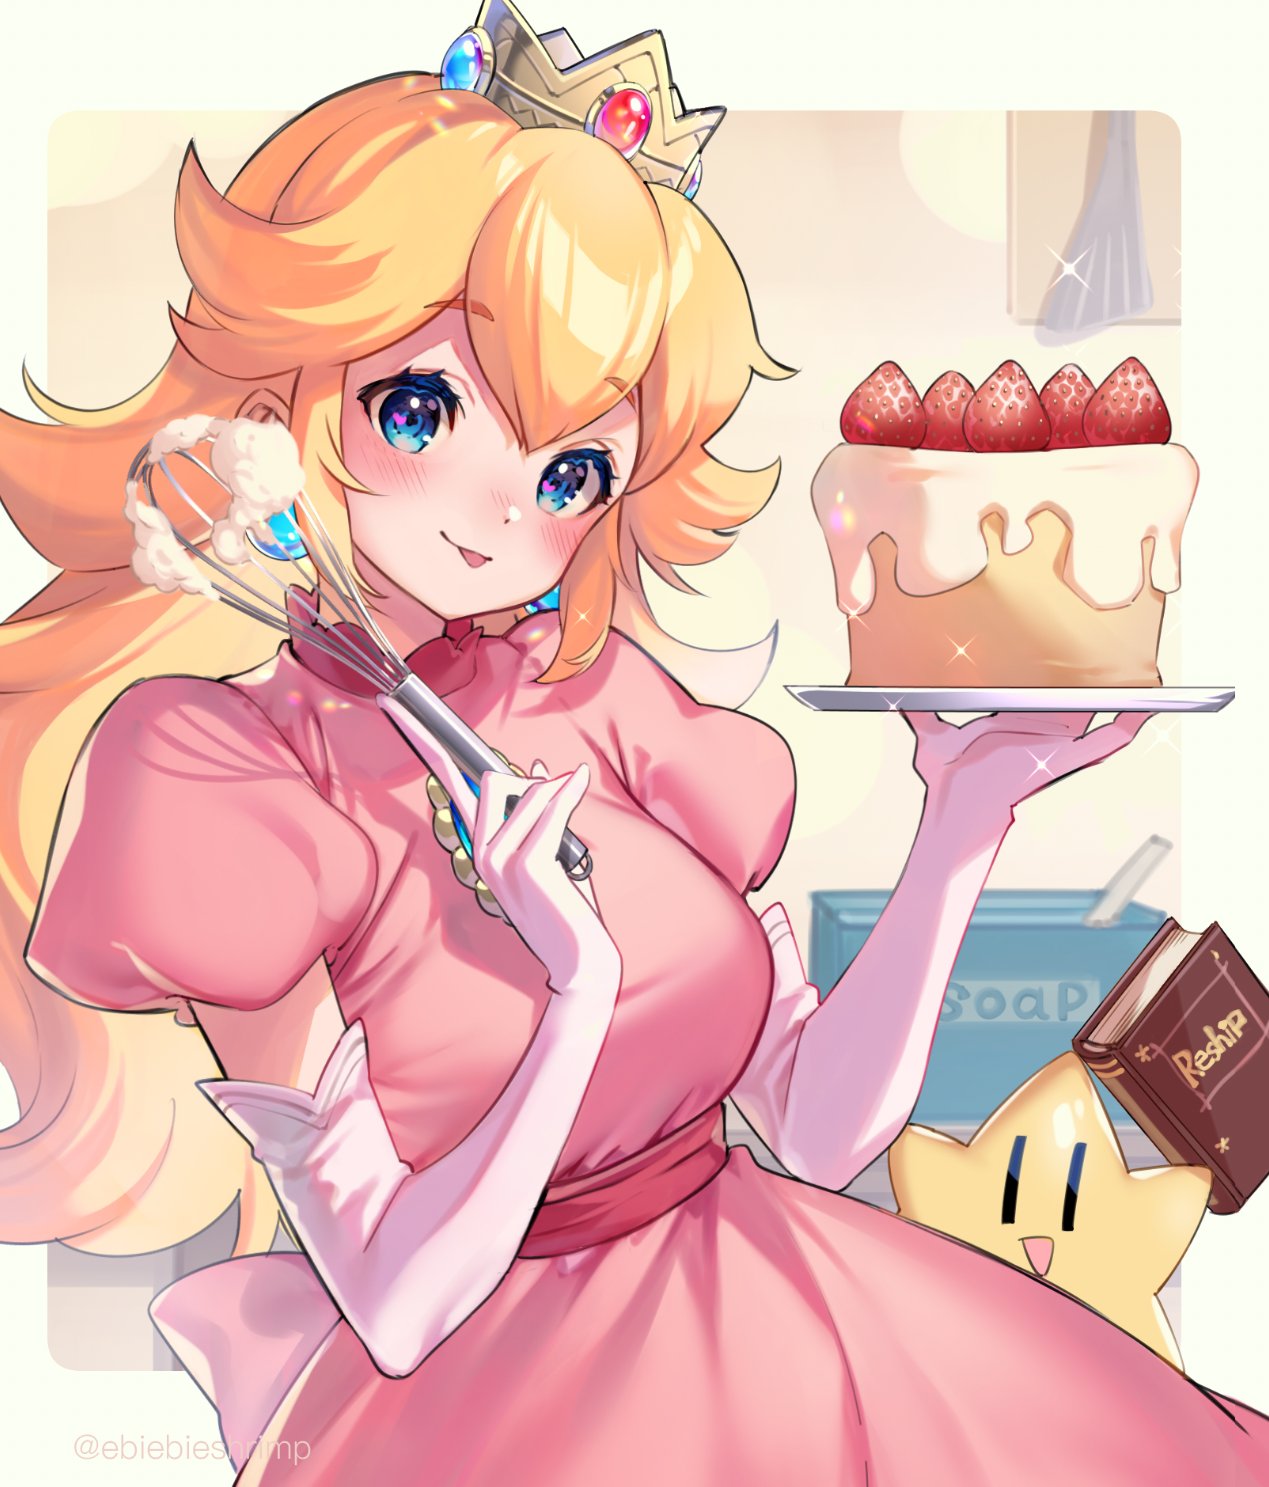 1girl baking bangs blonde_hair blue_eyes blush breasts cake cookbook cooking crown dress elbow_gloves eyebrows_visible_through_hair food gem gloves highres holding holding_food icing large_breasts looking_at_viewer nintendo princess_peach shuri_(84k) soap starman_(mario) strawberry_shortcake super_mario_bros. super_mario_bros. super_smash_bros. tongue tongue_out whisk